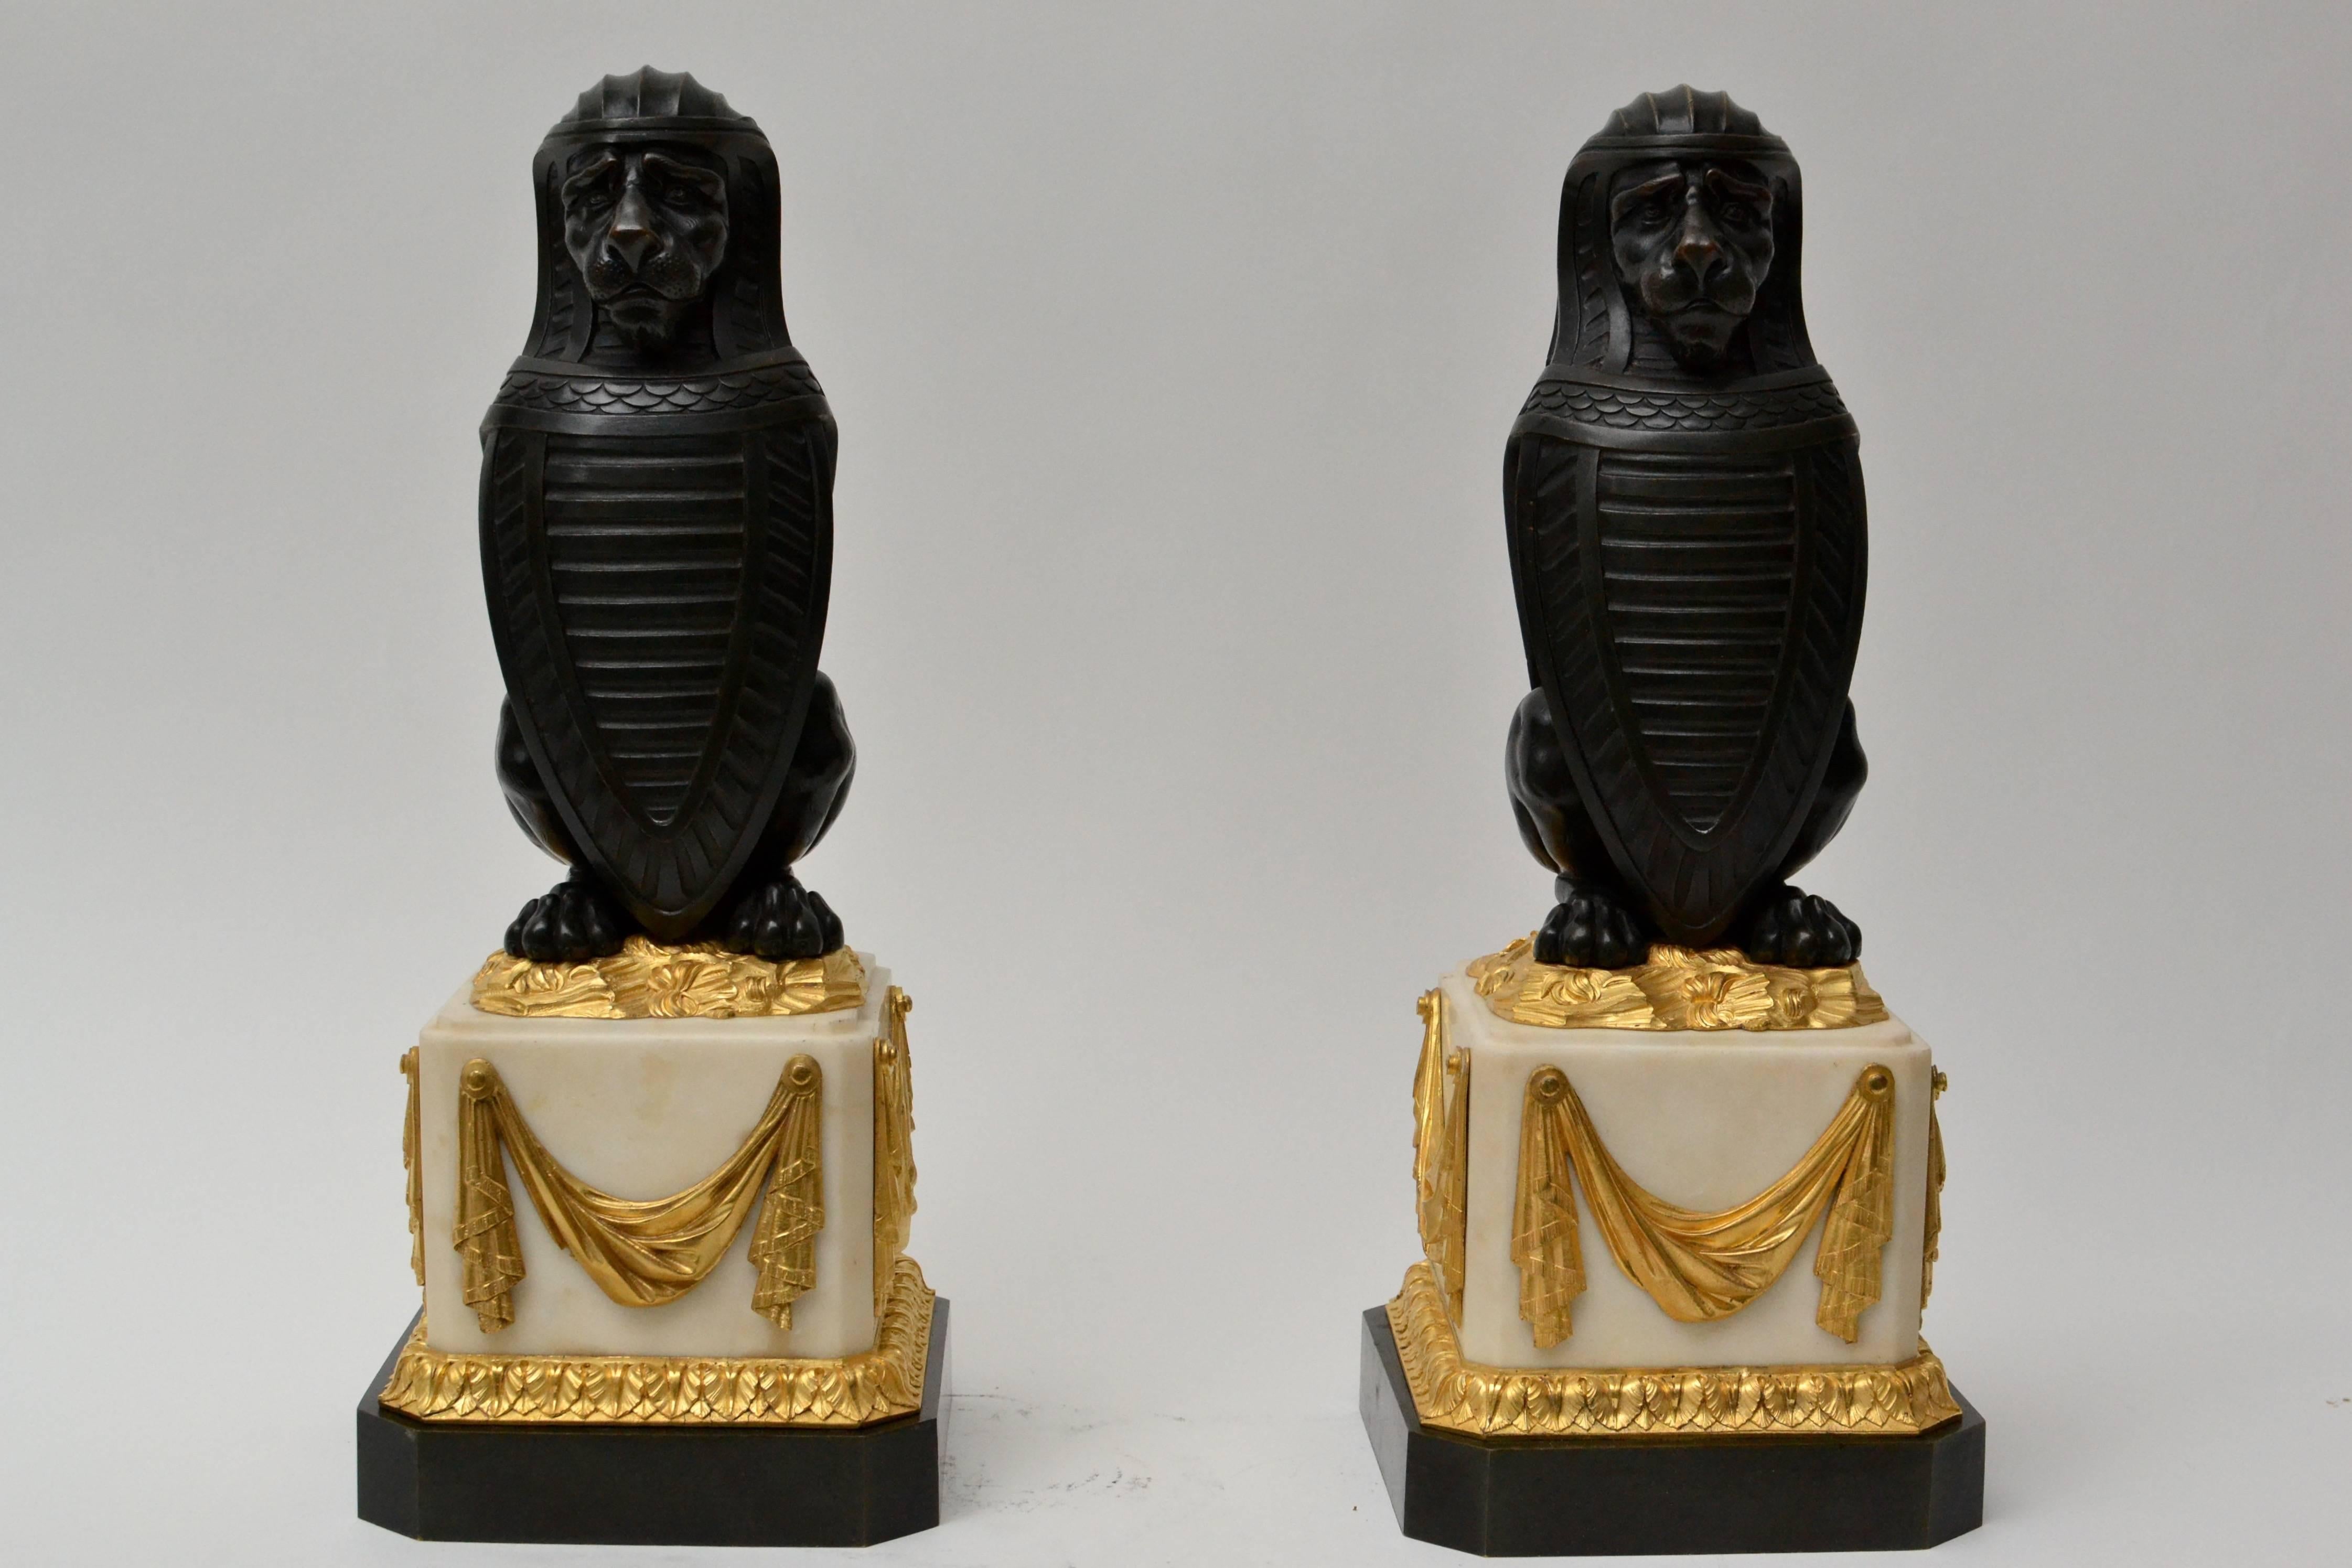 Pair of patinated bronze lions holding a shield on ormolu-mounted white marble bases, probably English, George III and late 18th century.